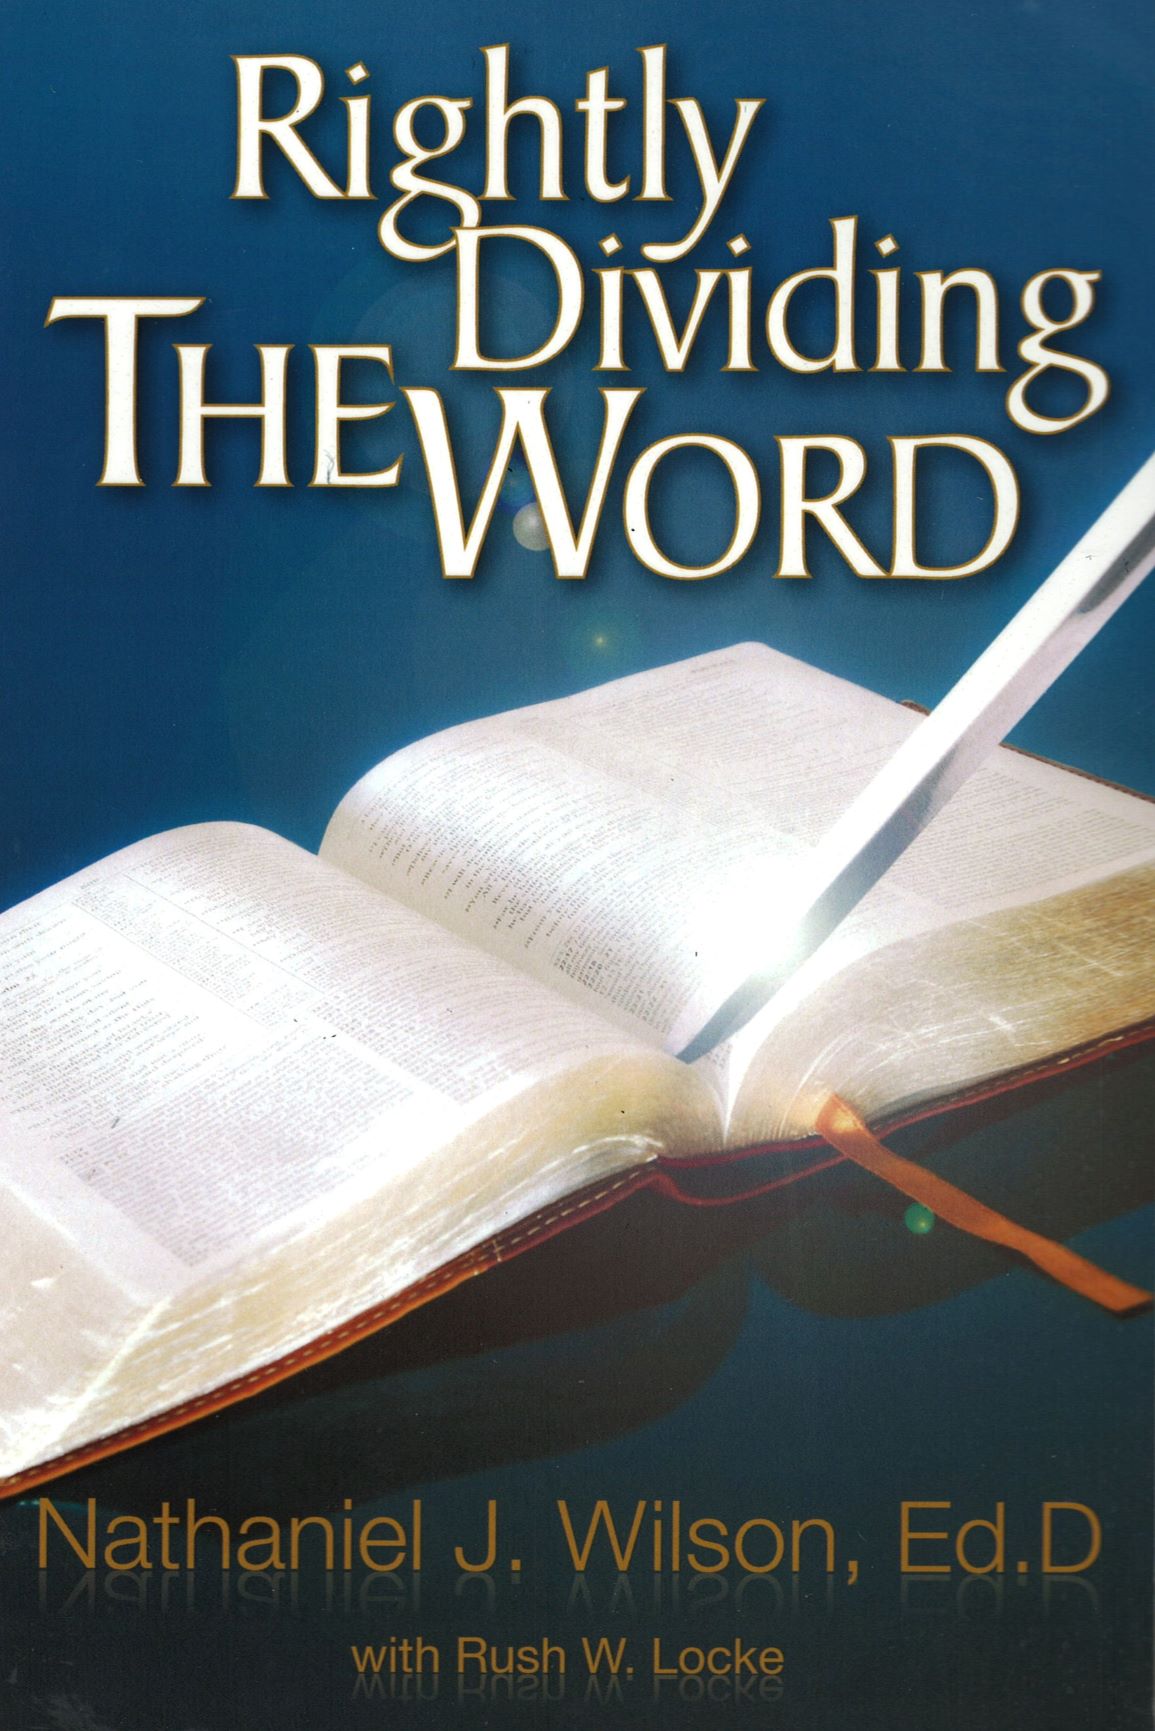 Rightly Dividing the Word - Nathaniel J. Wilson (Paperback)